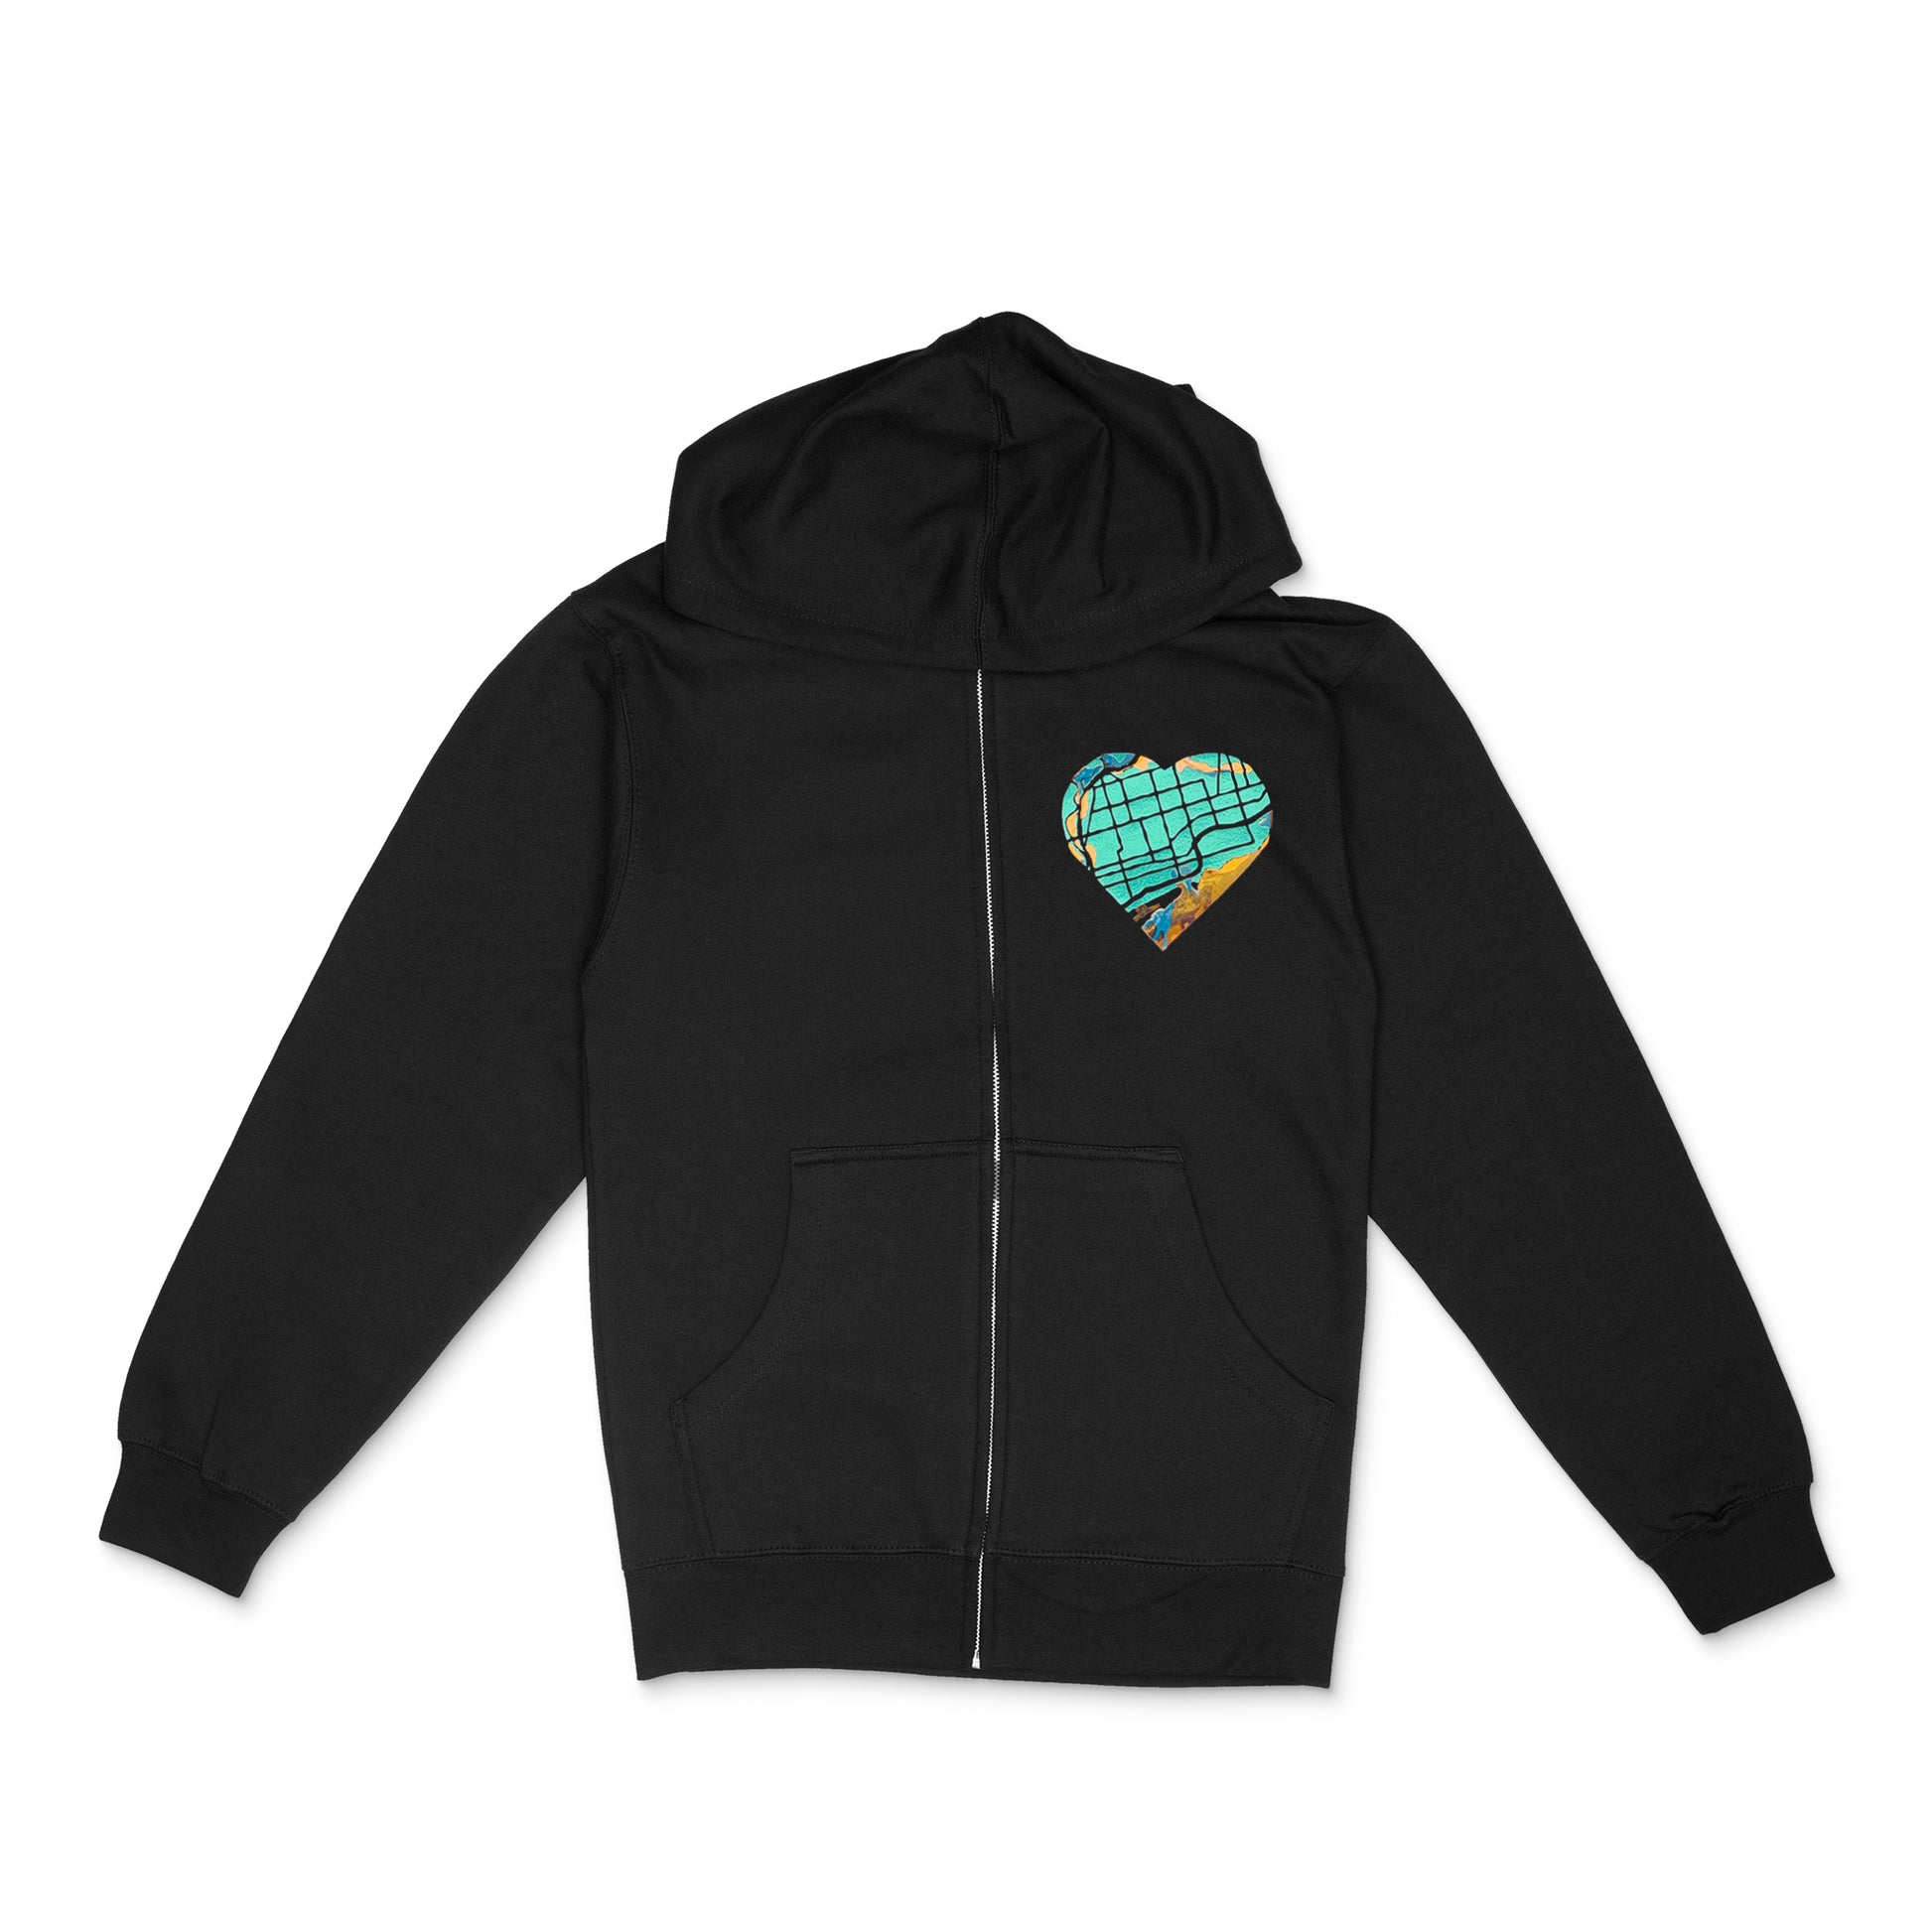 Black zip-up hoodie sweatshirt with metallic teal and shiny holographic east-end-map heart - front - by BBJ with East End Arts 